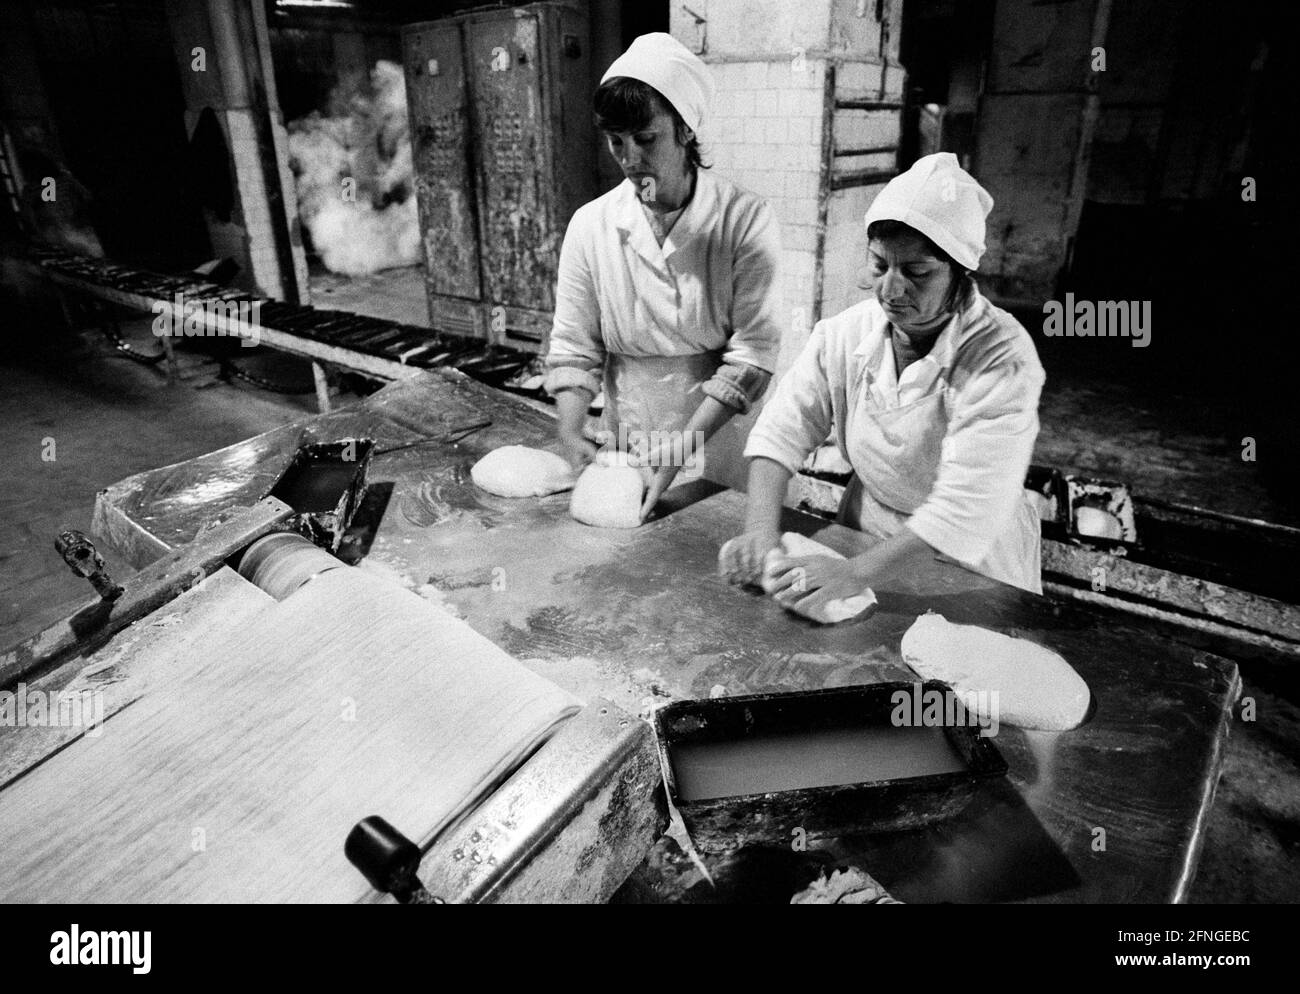 ALB , Albania : Two women baking bread in a bakery / bread factory in Tirana , April 1994 [automated translation] Stock Photo